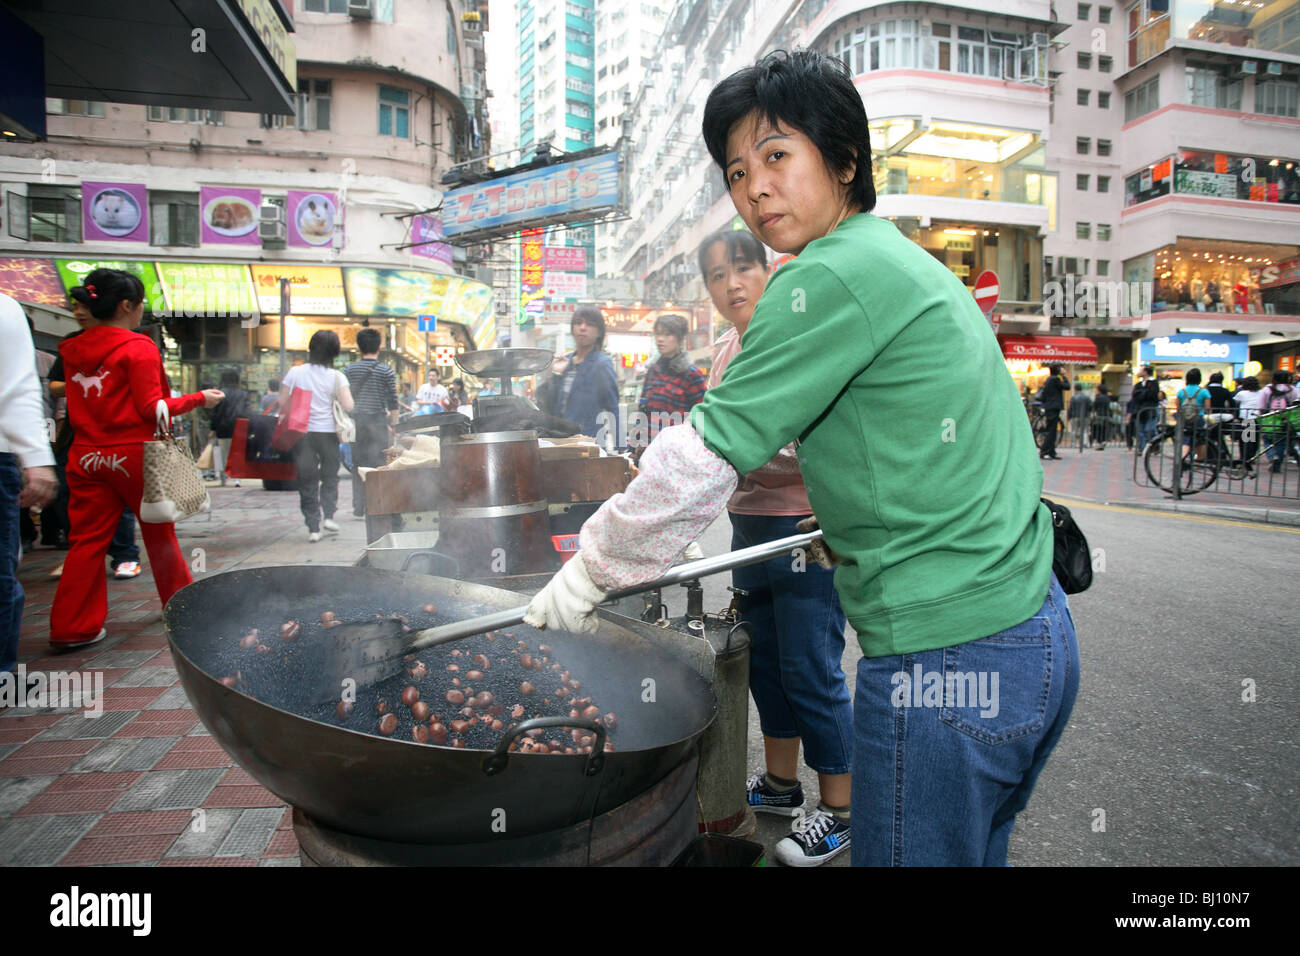 Women preparing chestnuts in a wok in Hong Kong, China Stock Photo - Alamy